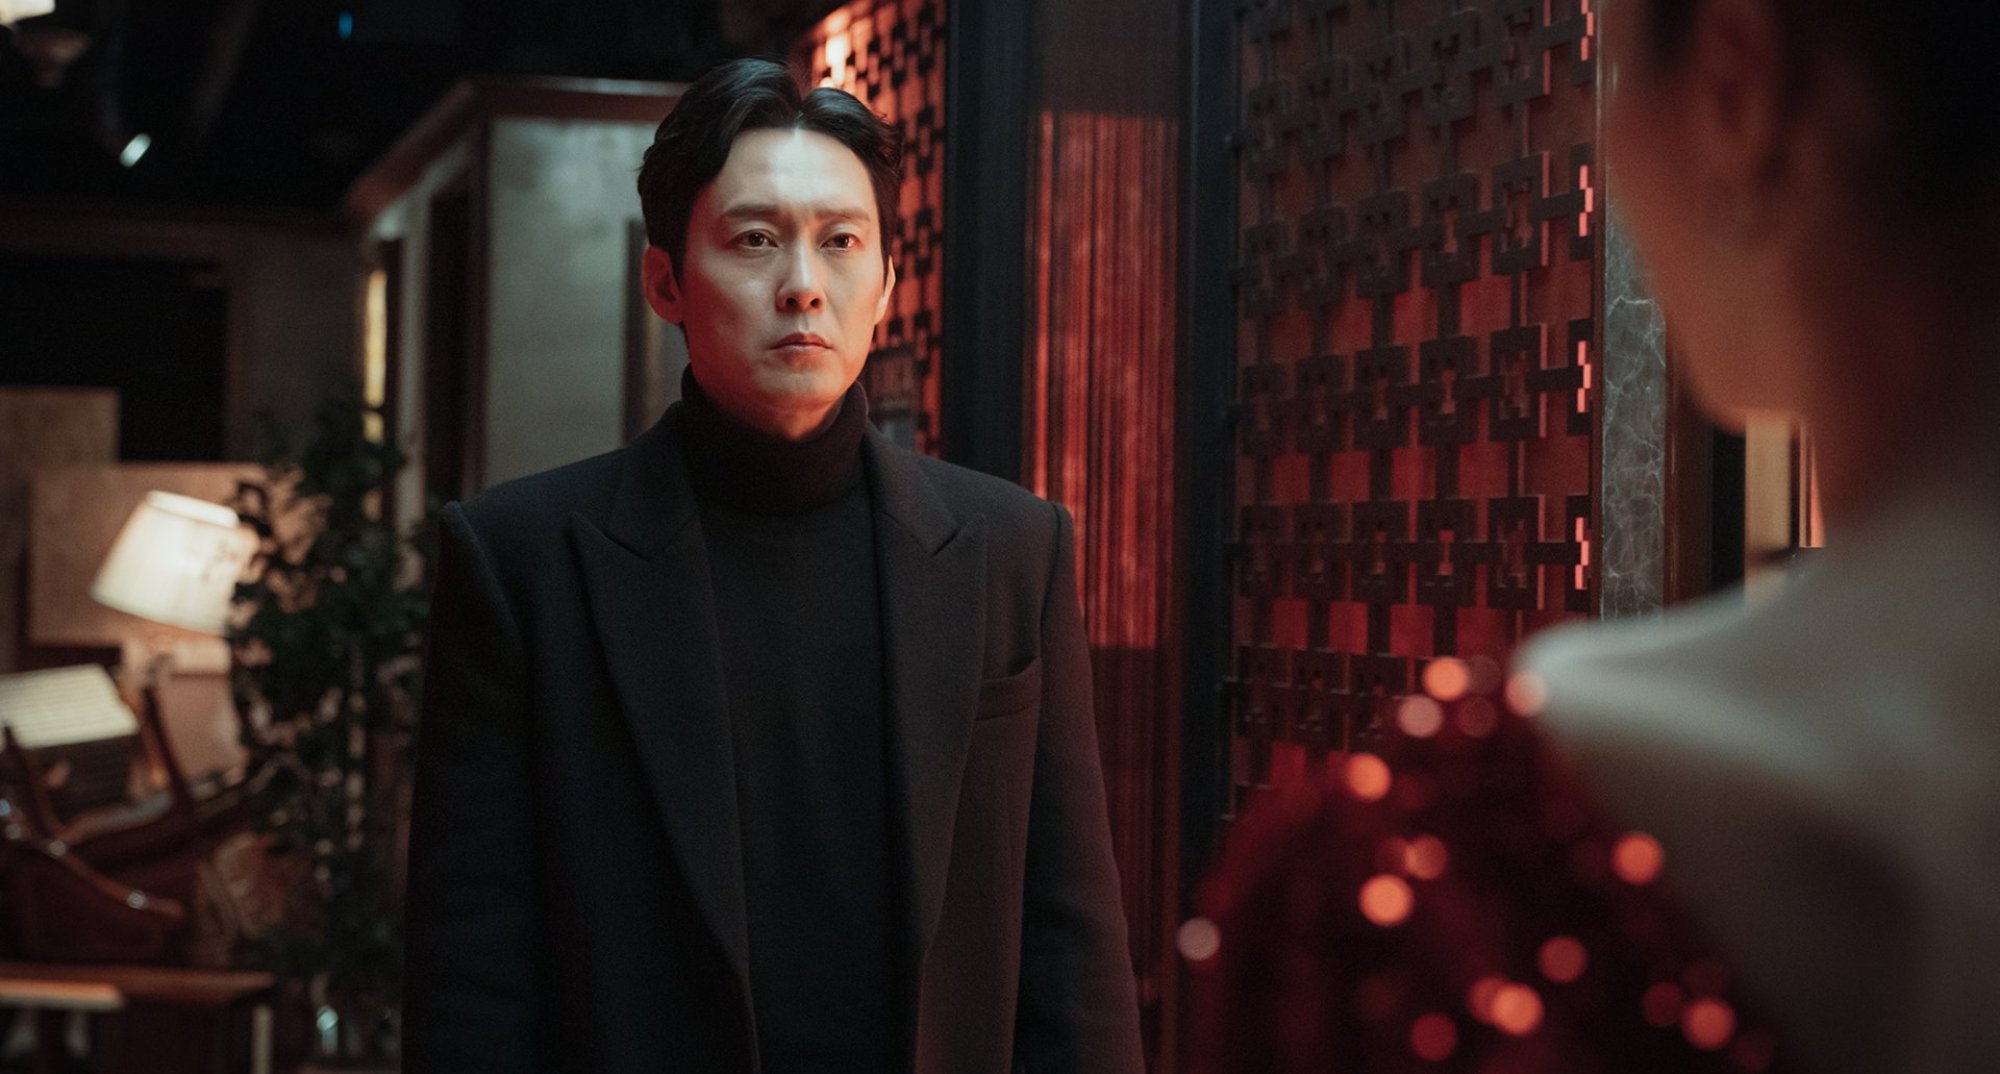 Actor Park Byung-eun as Yoon-kyum in 'Eve' Episode 4 wearing a black coat in regards to fan theory.